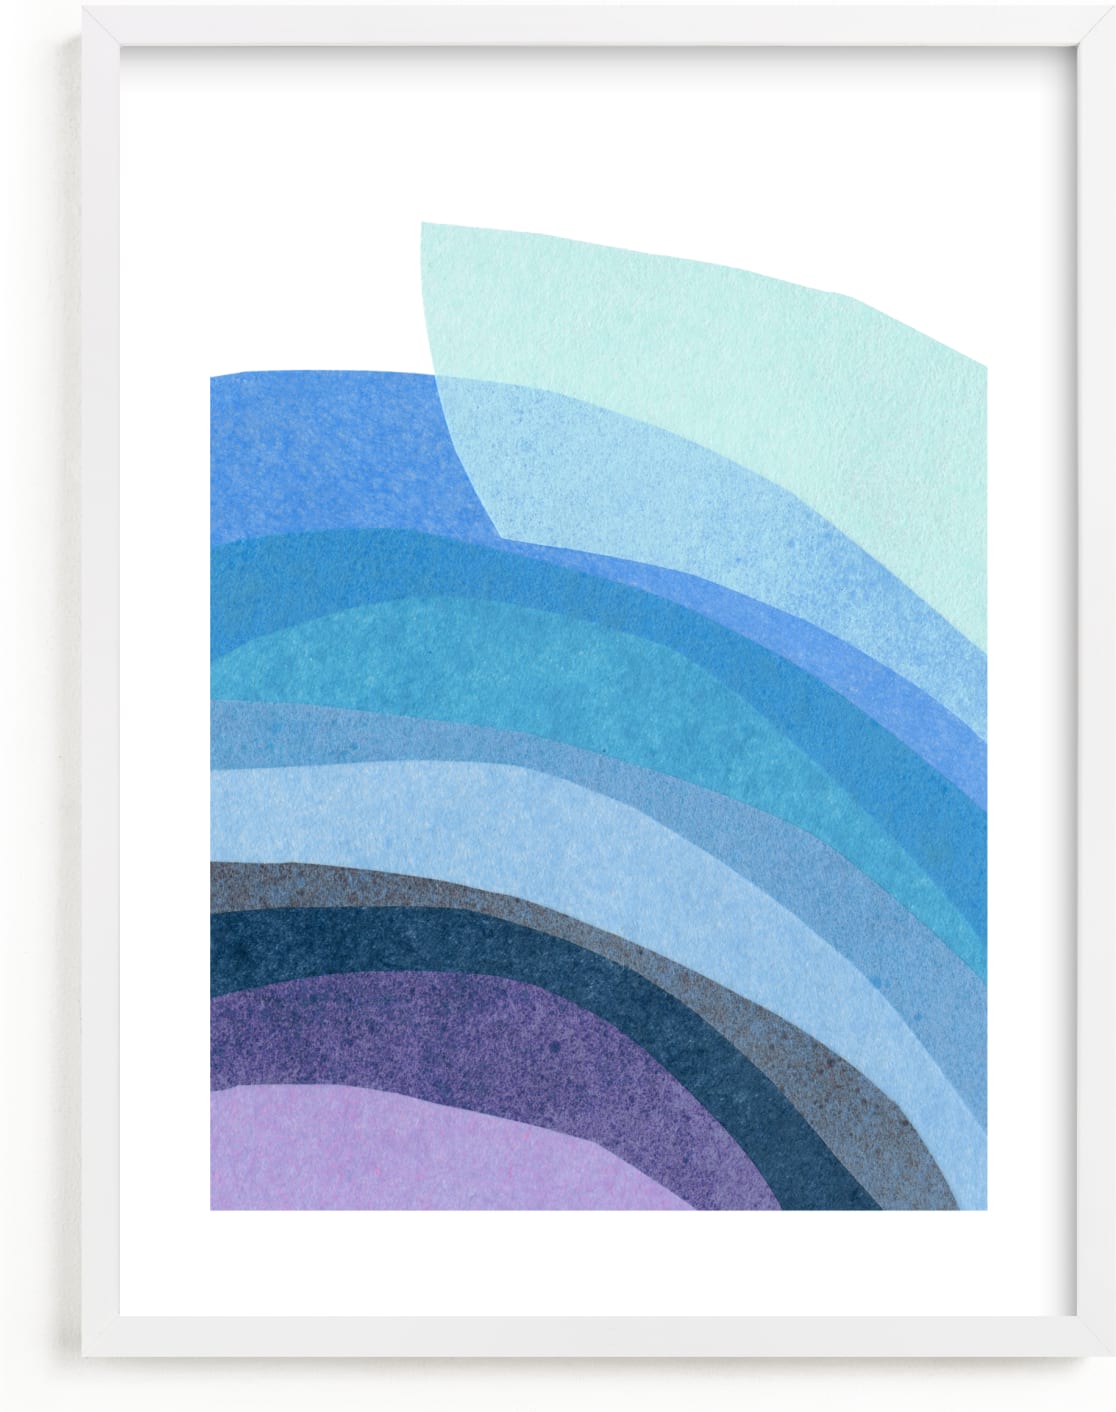 This is a blue art by Carrie Moradi called paper rainbow.